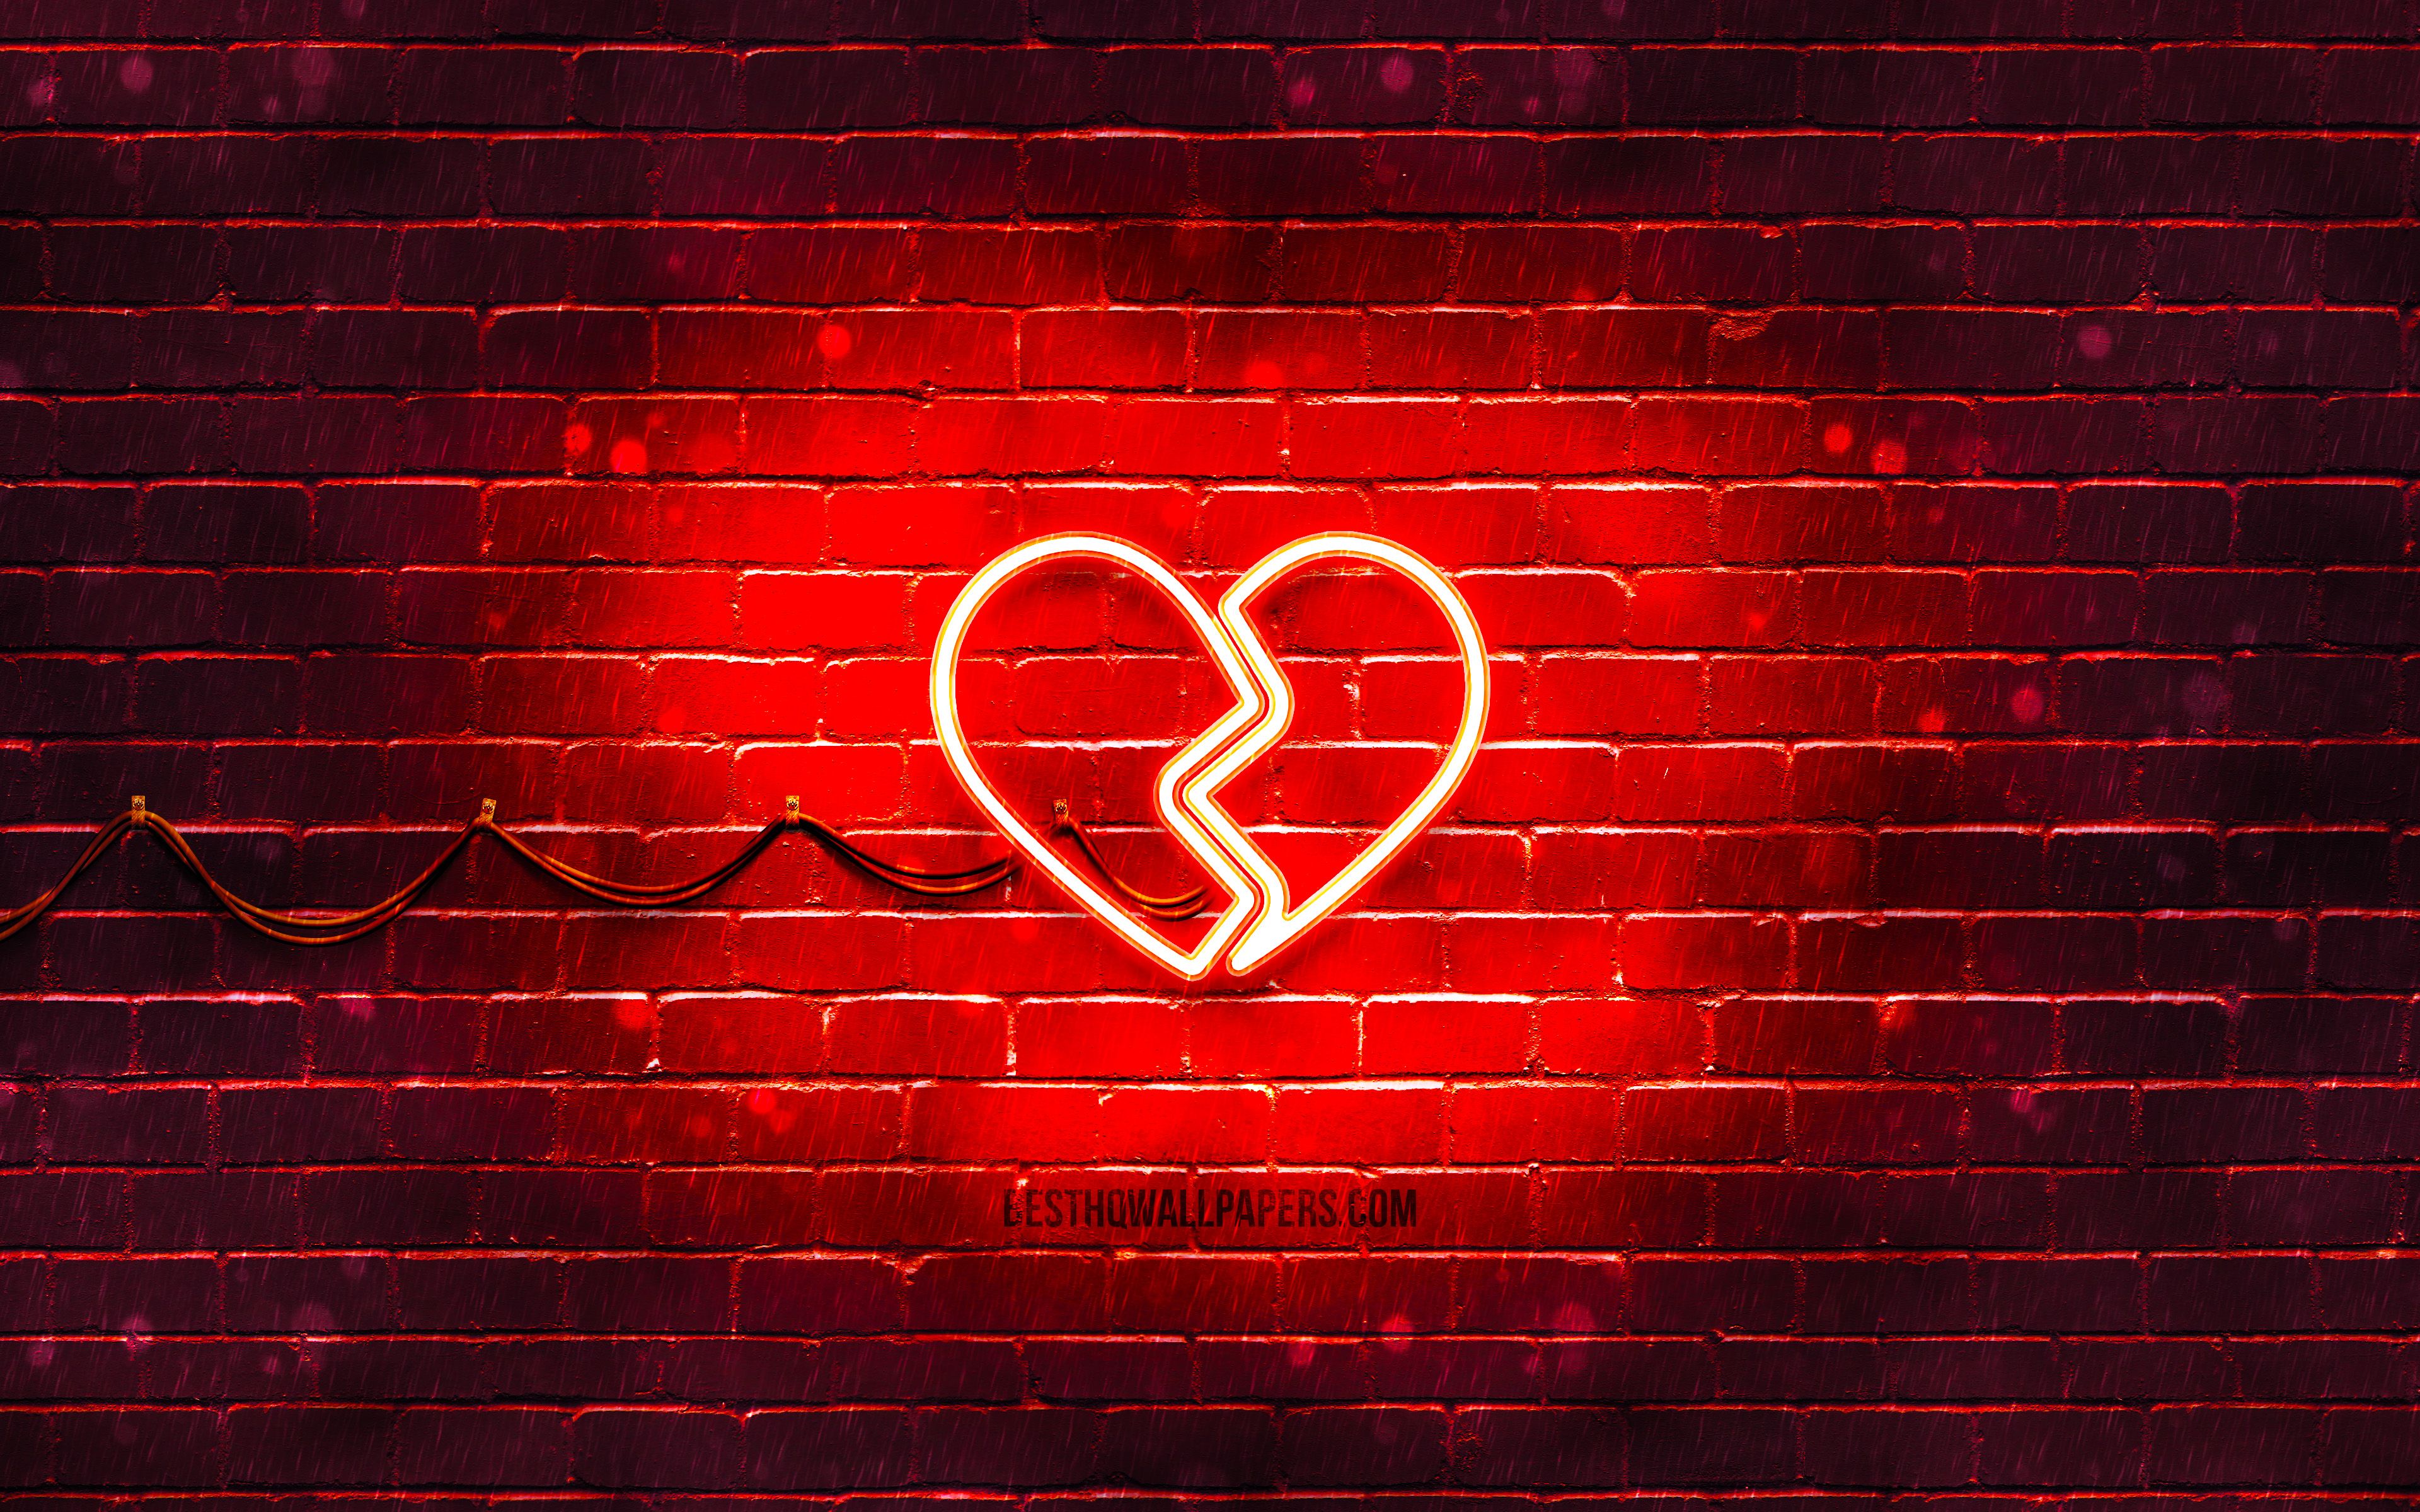 Download wallpaper Broken Heart neon icon, 4k, red background, neon symbols, Broken Heart, neon icons, Broken Heart sign, love signs, Broken Heart icon, love icons, love concepts for desktop with resolution 3840x2400